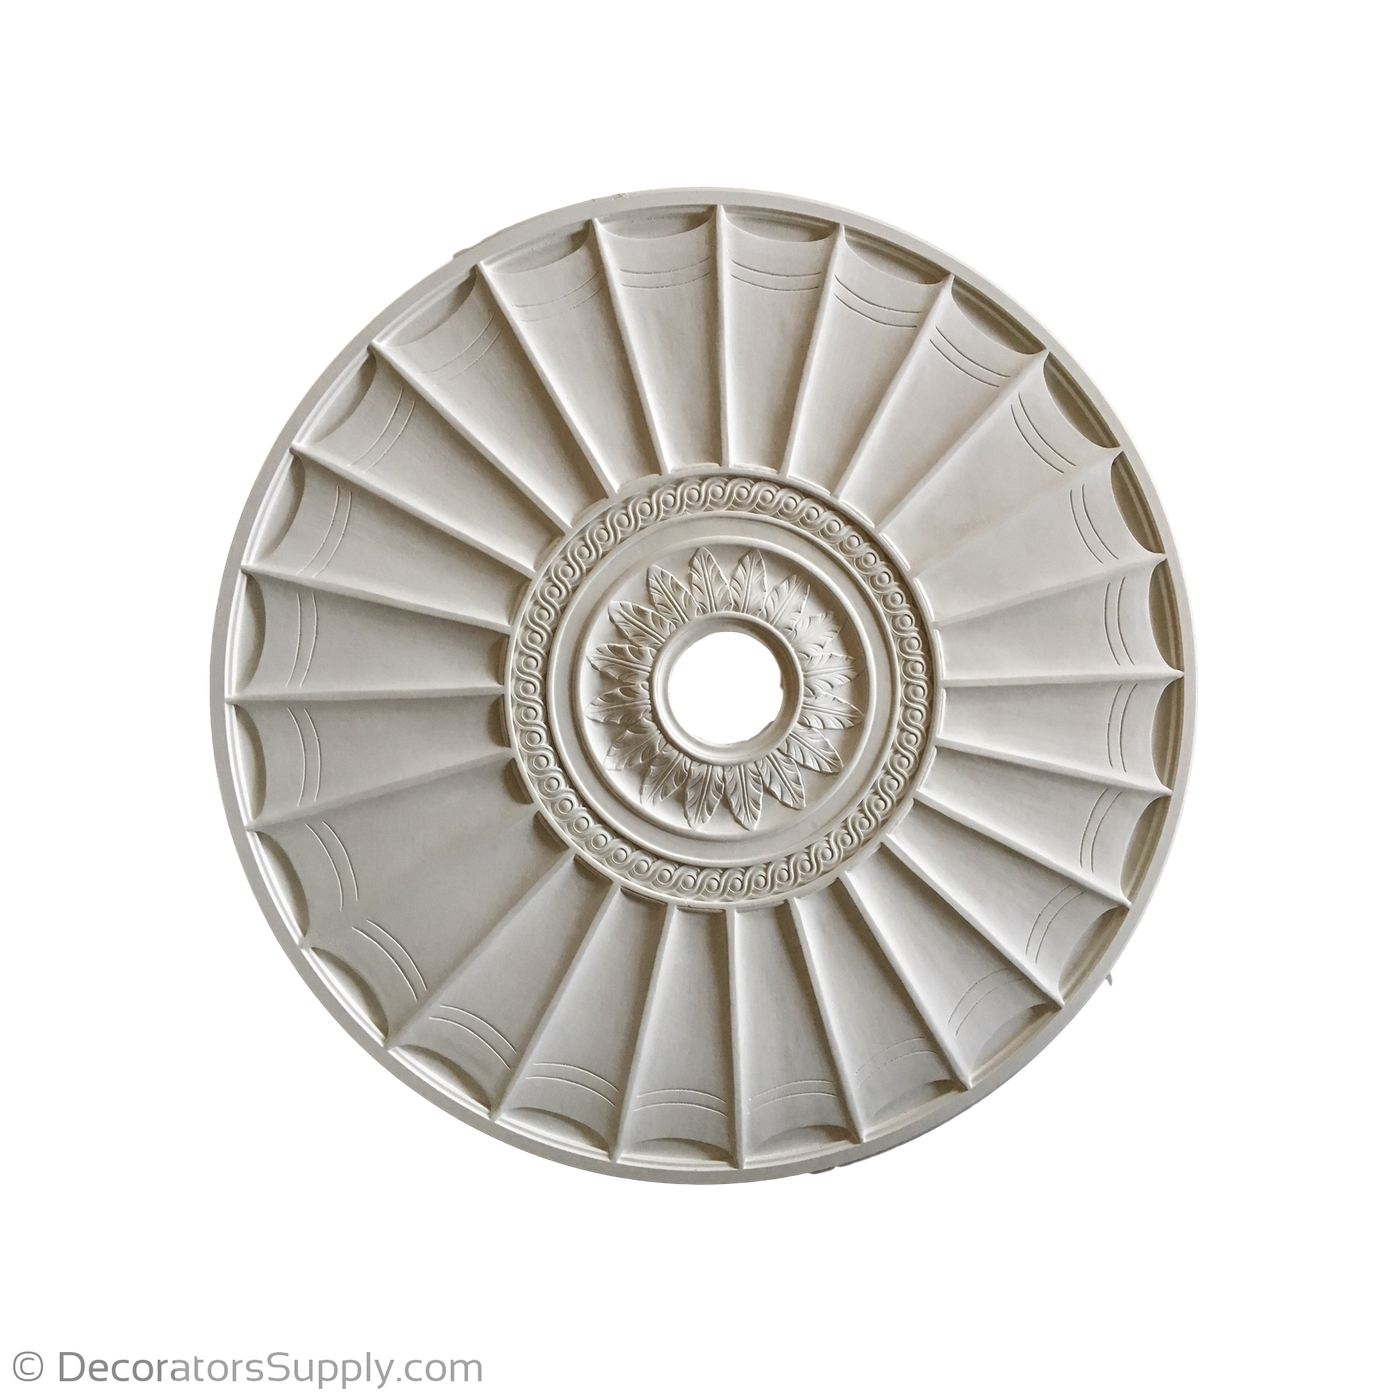 Large Ceiling Medallions For Chandeliers And Ceiling Fans Since 1890